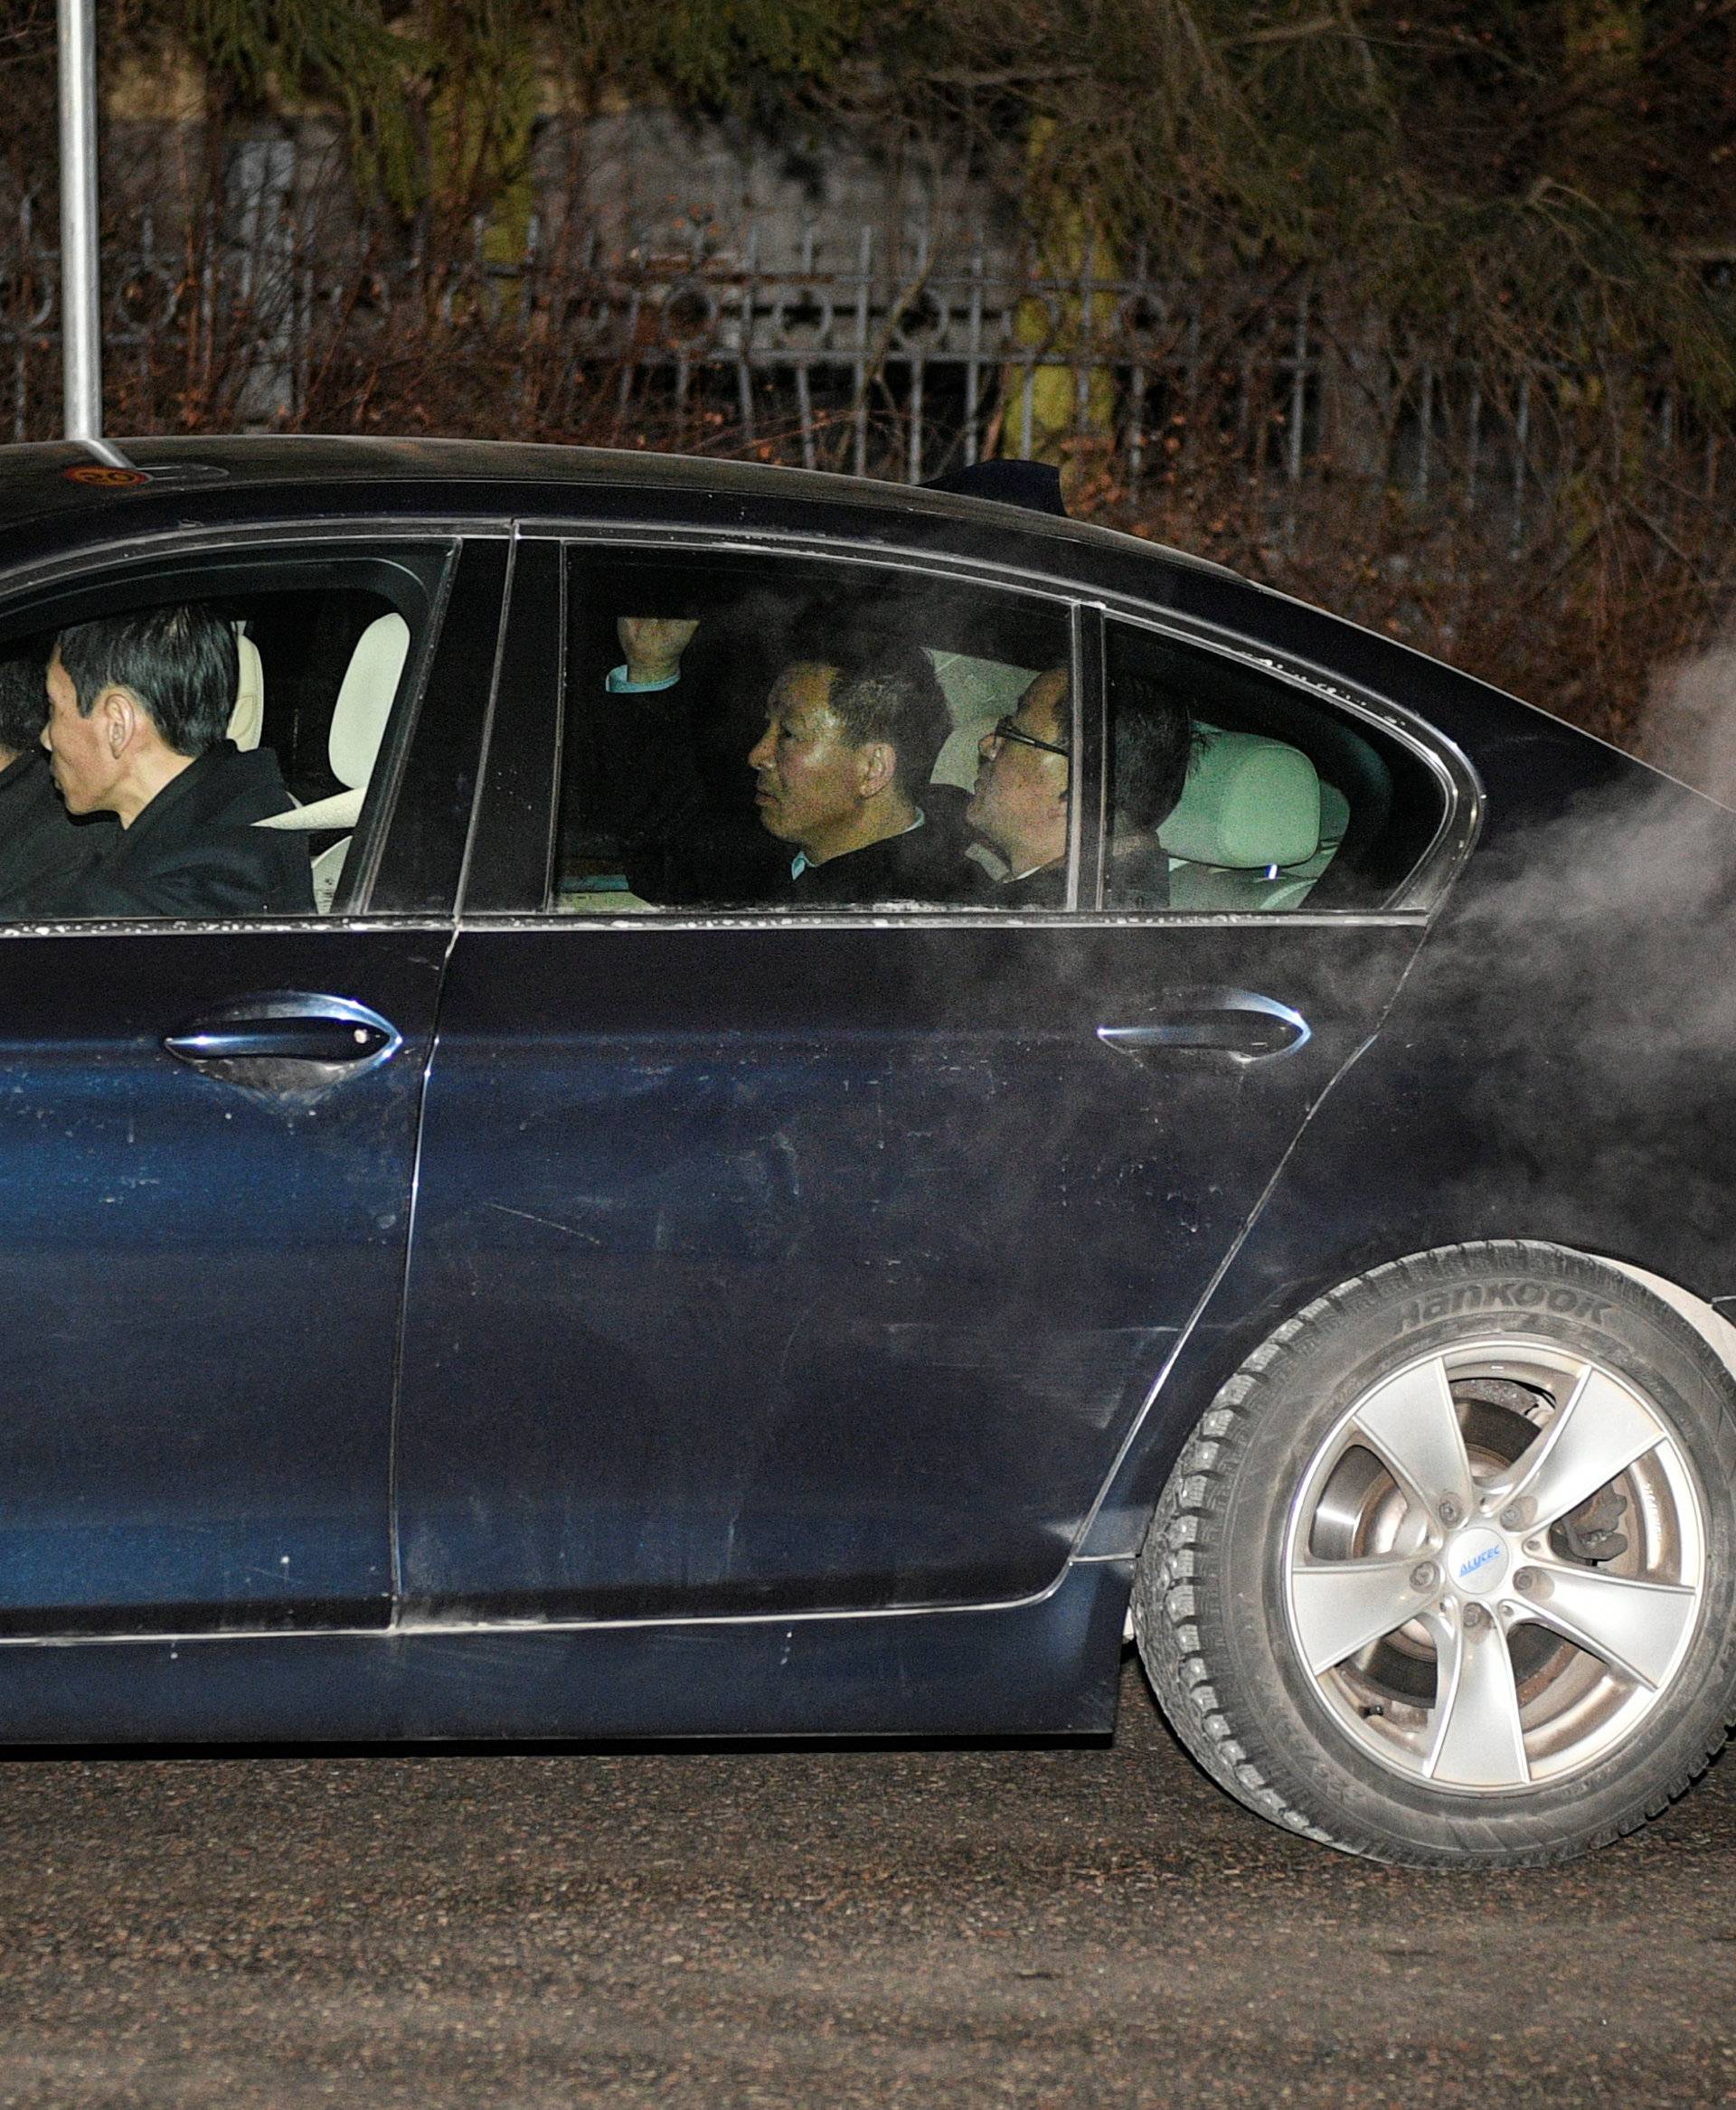 North Korea's Foreign Minister Ri Yong Ho and his delegation arrive at North Korean embassy in Stockholm